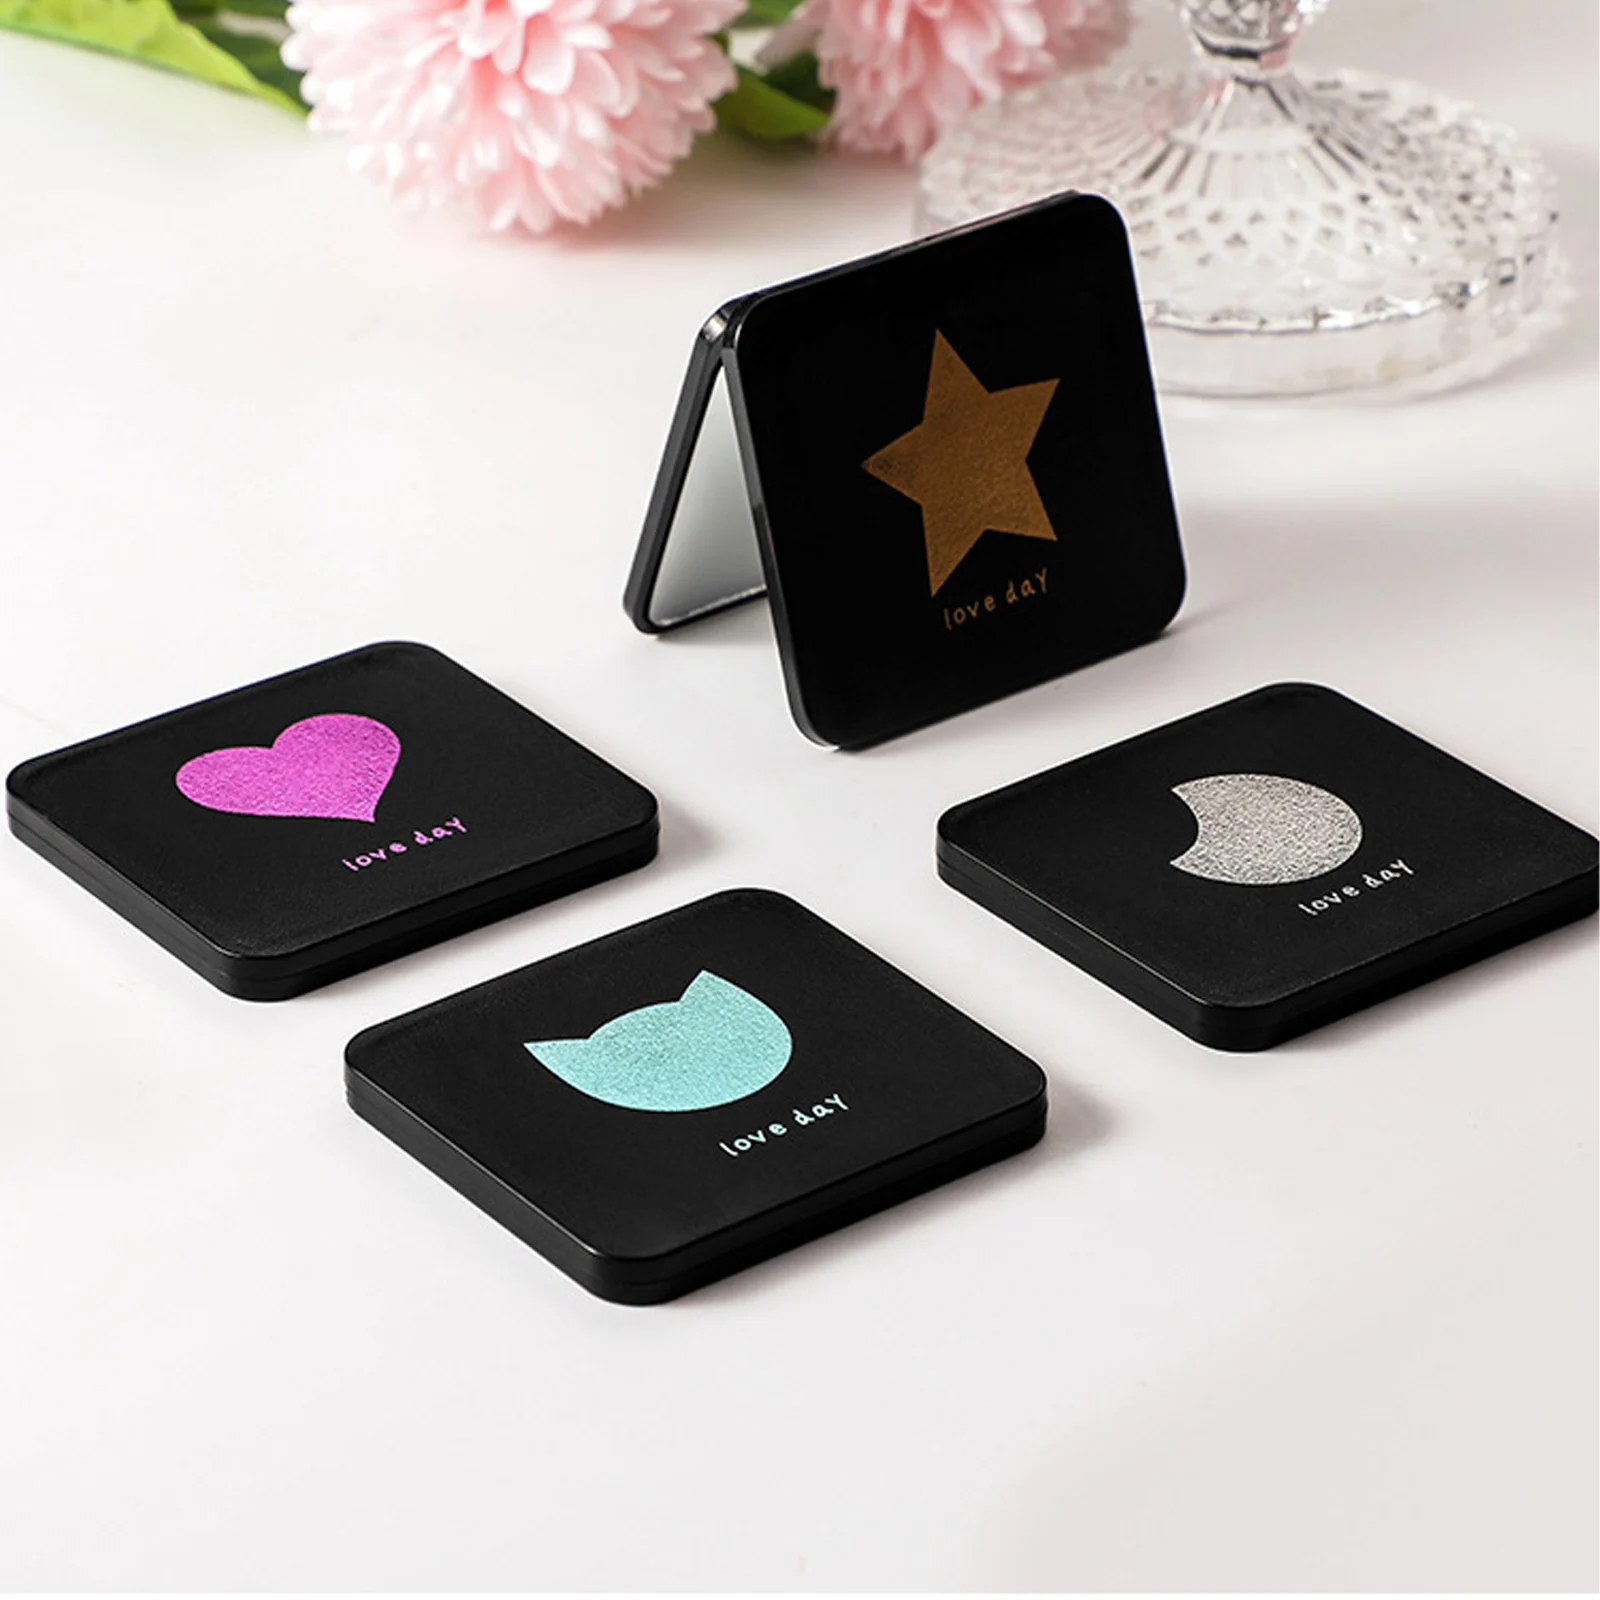 Mini Double Sided Makeup Mirror Folding Compact Mirror Female Portable Travel Square Handheld Pocket Mirror Makeup Accessories 2023 new autumn fashion fragrant double sided woolen coat women s short round neck single breasted casual overcoat female